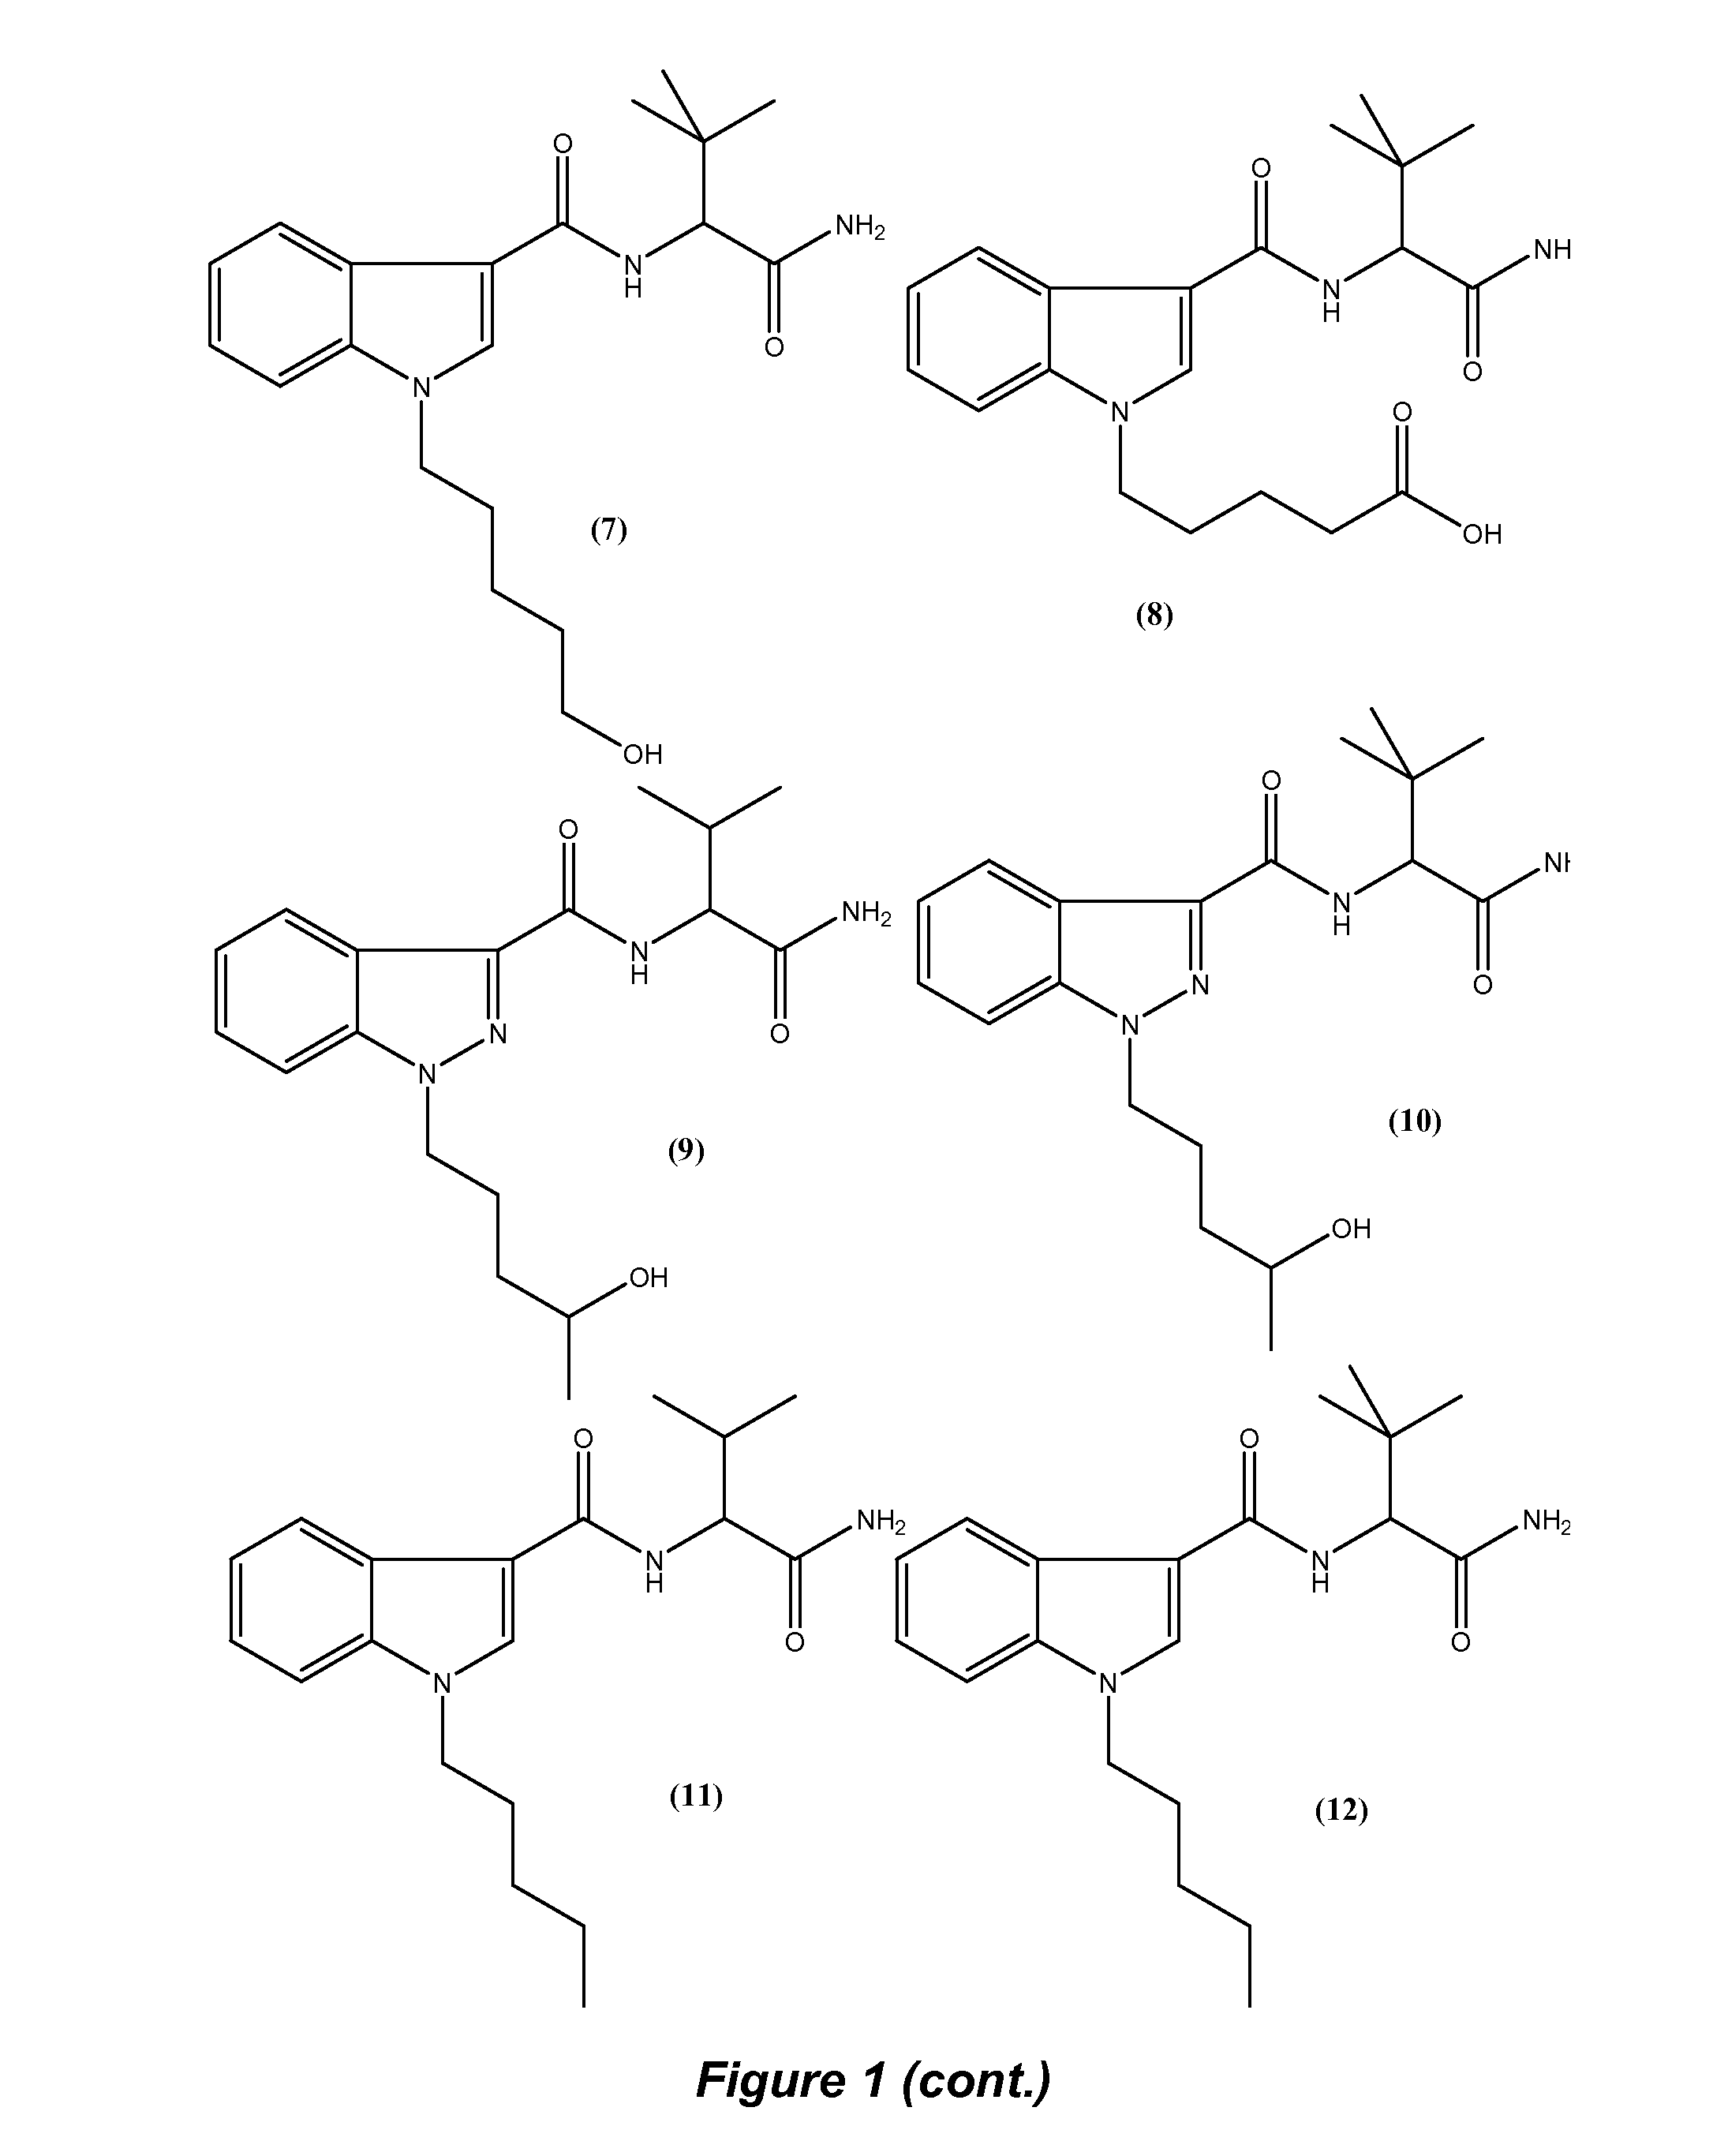 Detection of indazole synthetic cannabinoids